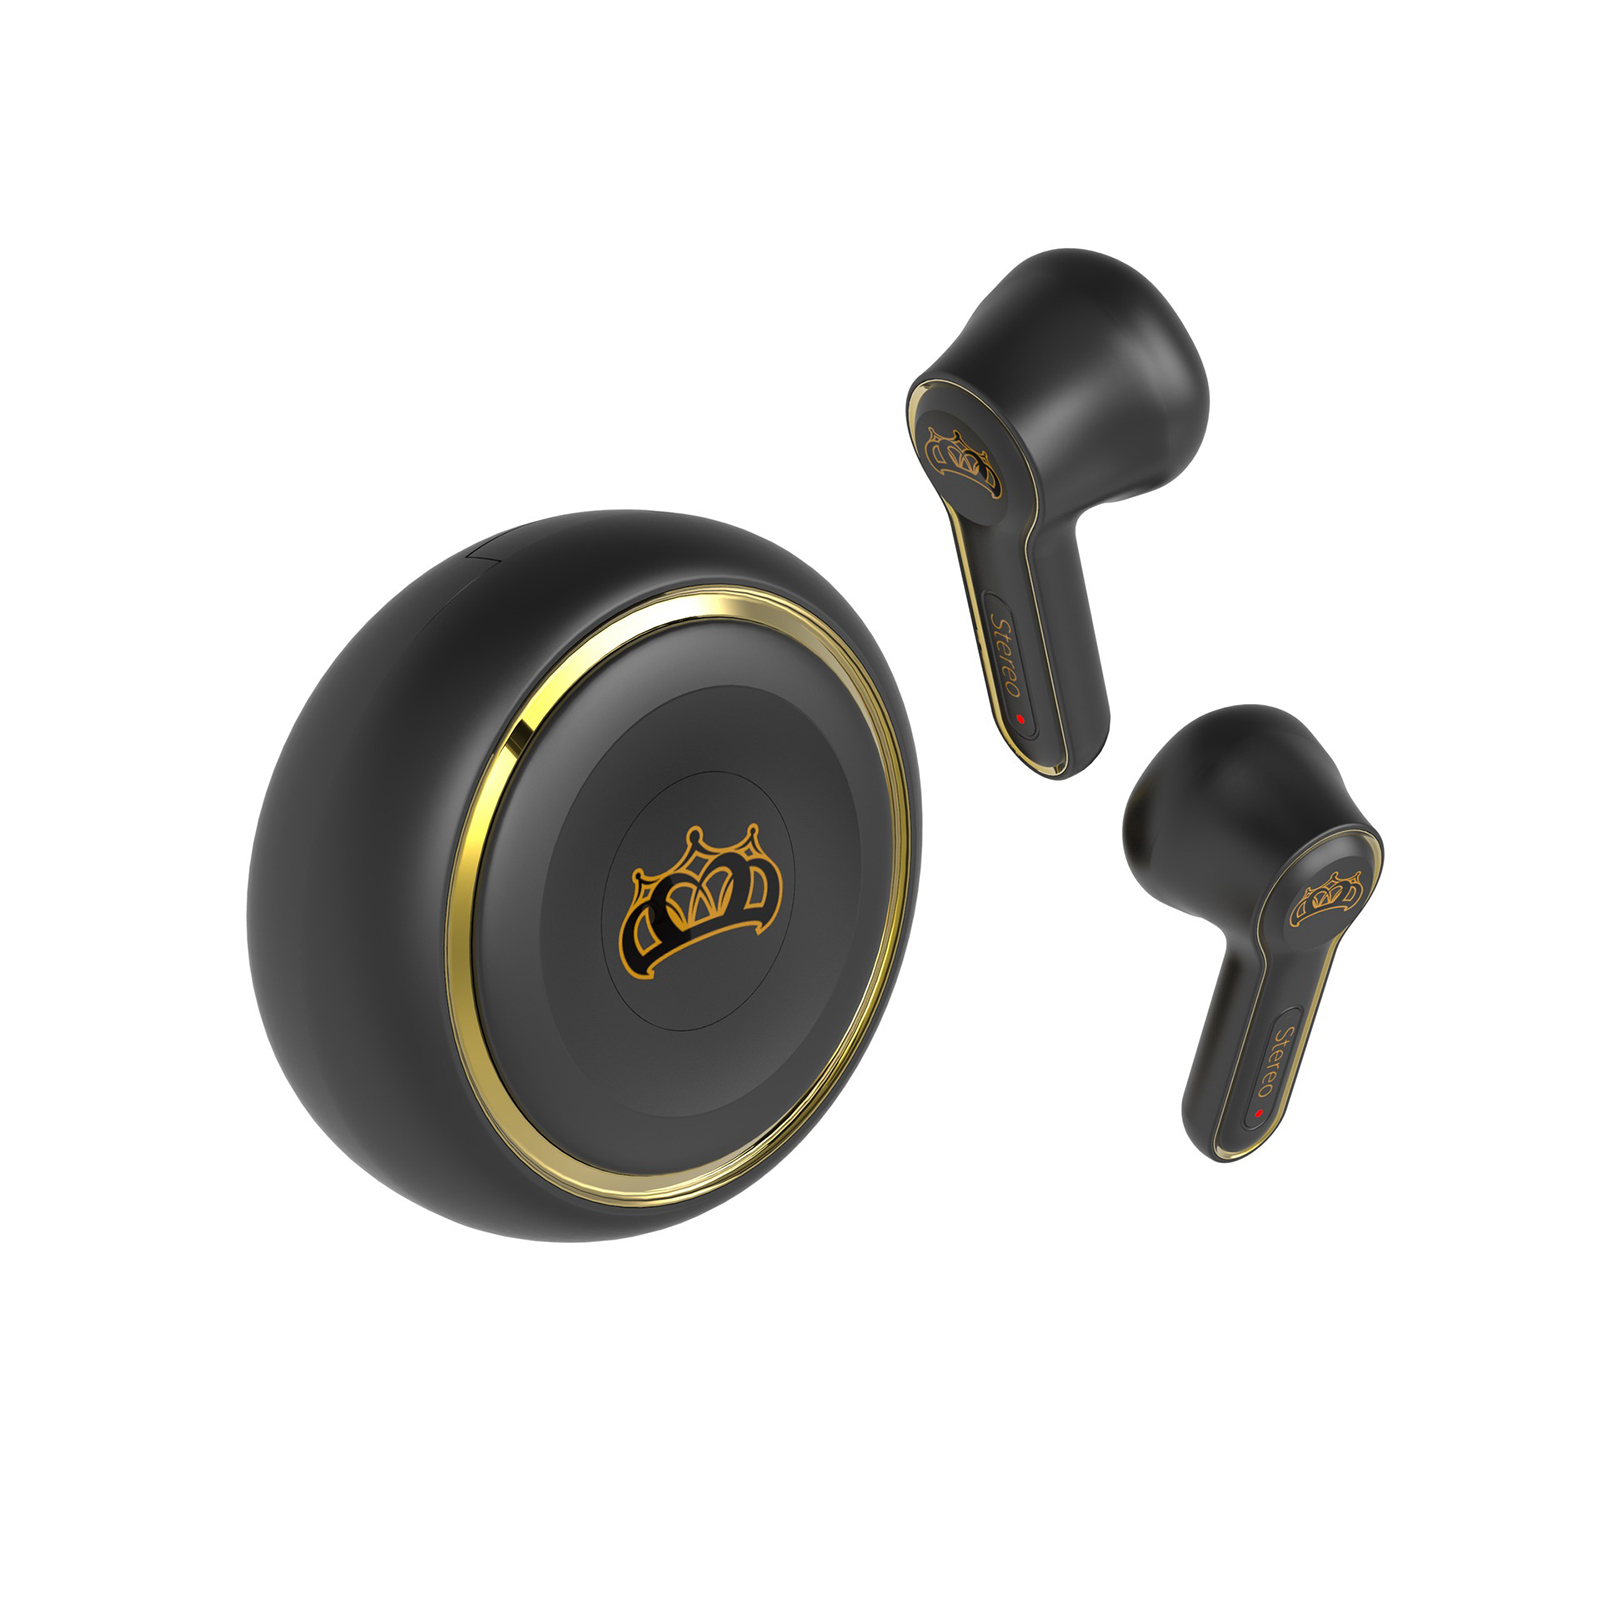 Wireless Earphones Stereo Sound With Charging Case Low Latency Headphones For Smart Phone Computer Laptop black